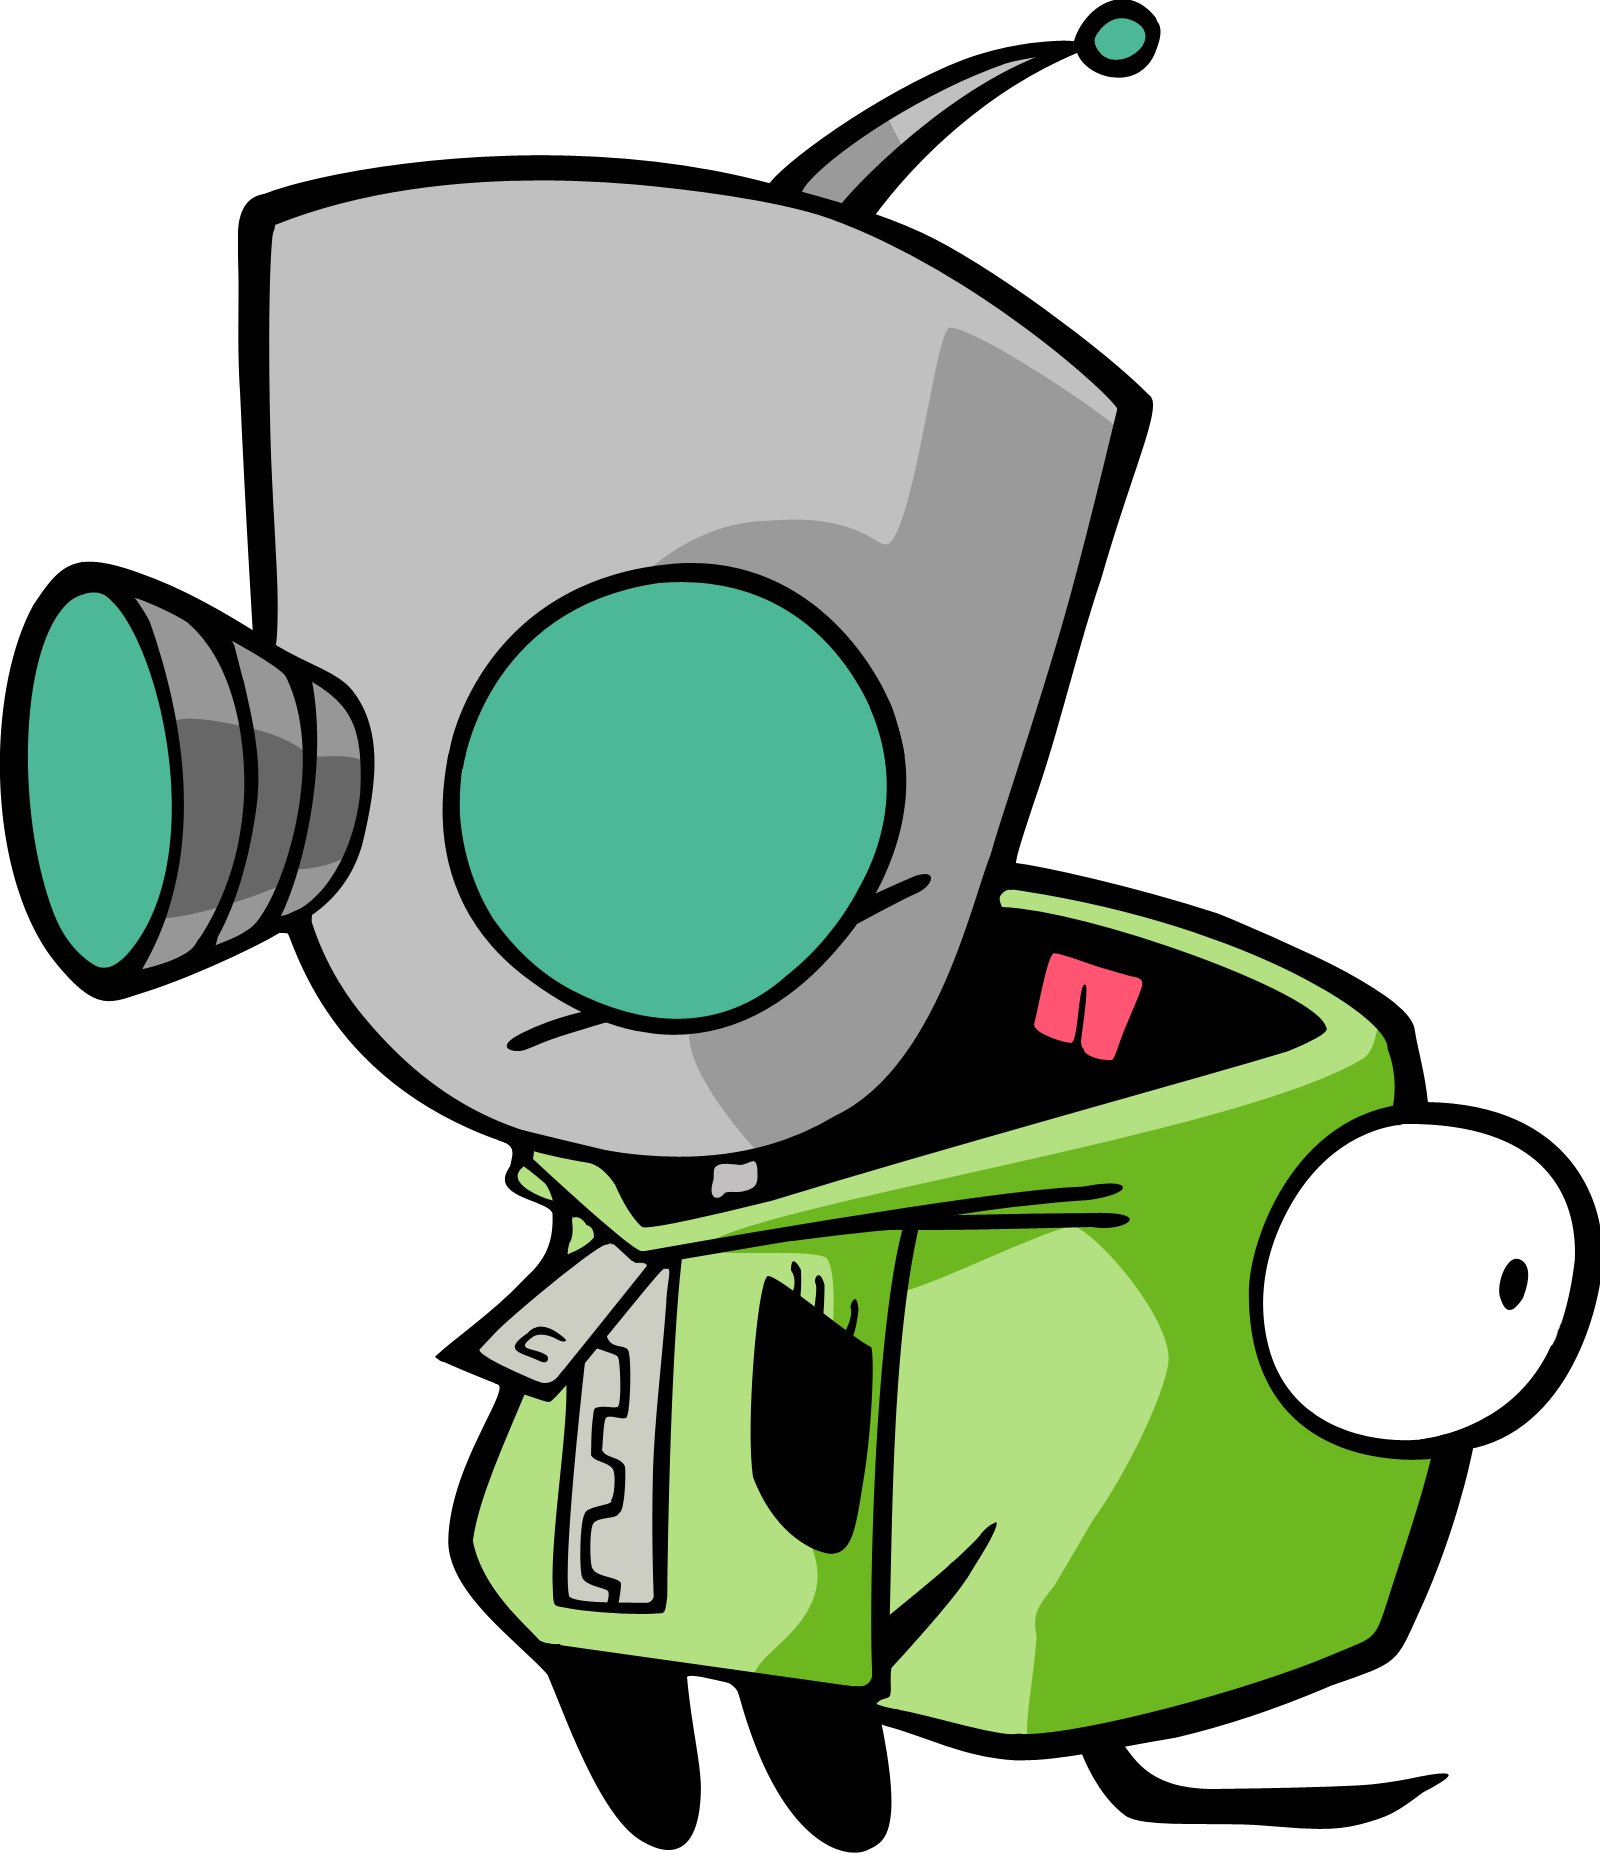 Image - GIR - Dog Suit Art.png | Invader ZIM Wiki | FANDOM powered by Wikia